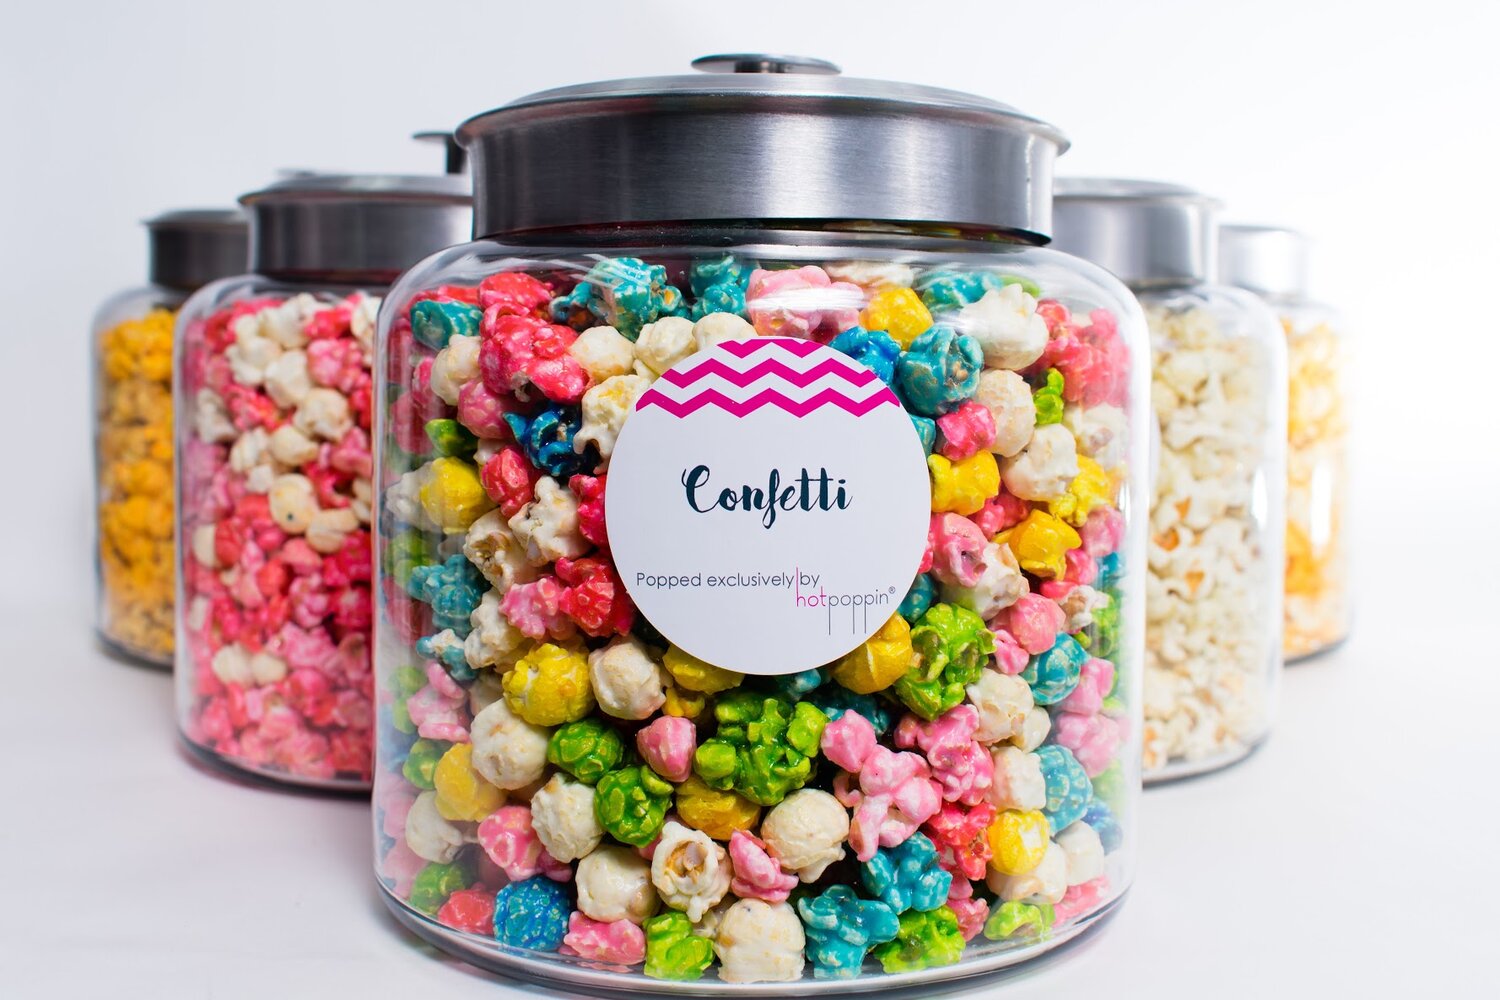 The Hotpoppin popcorn bar can be the next fun thing at your future events!